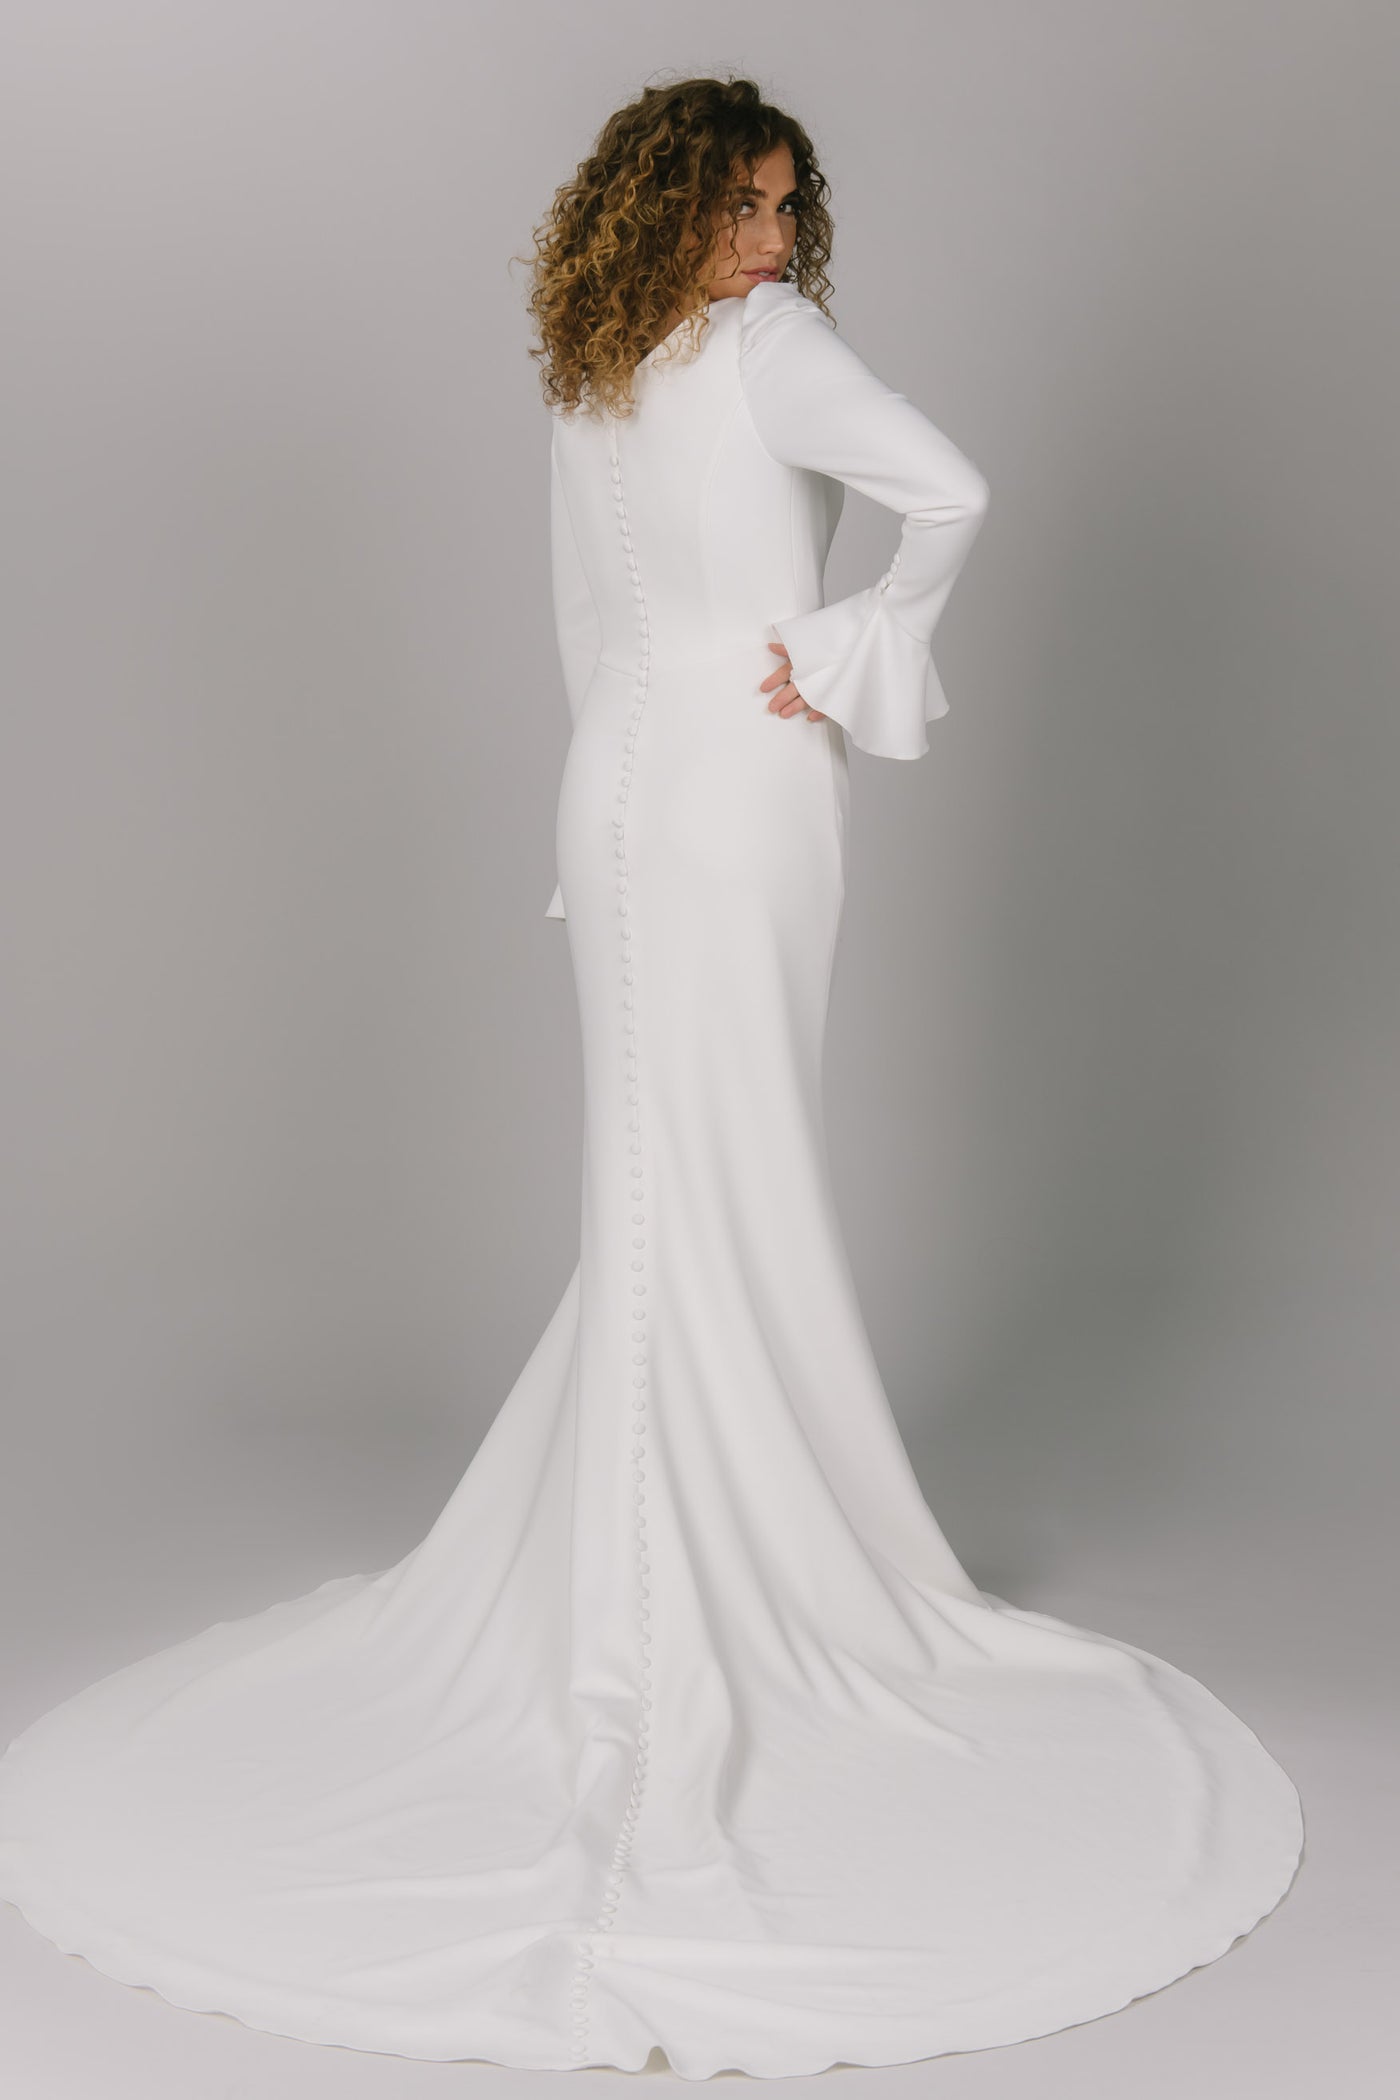 Back view of modest wedding dress with long trumpet-styled sleeves. This dress has a v-neckline and slit in the skirt. It does have a longer train to add drama. It has beautiful buttons all the way down the train. Timeless modest wedding dress.